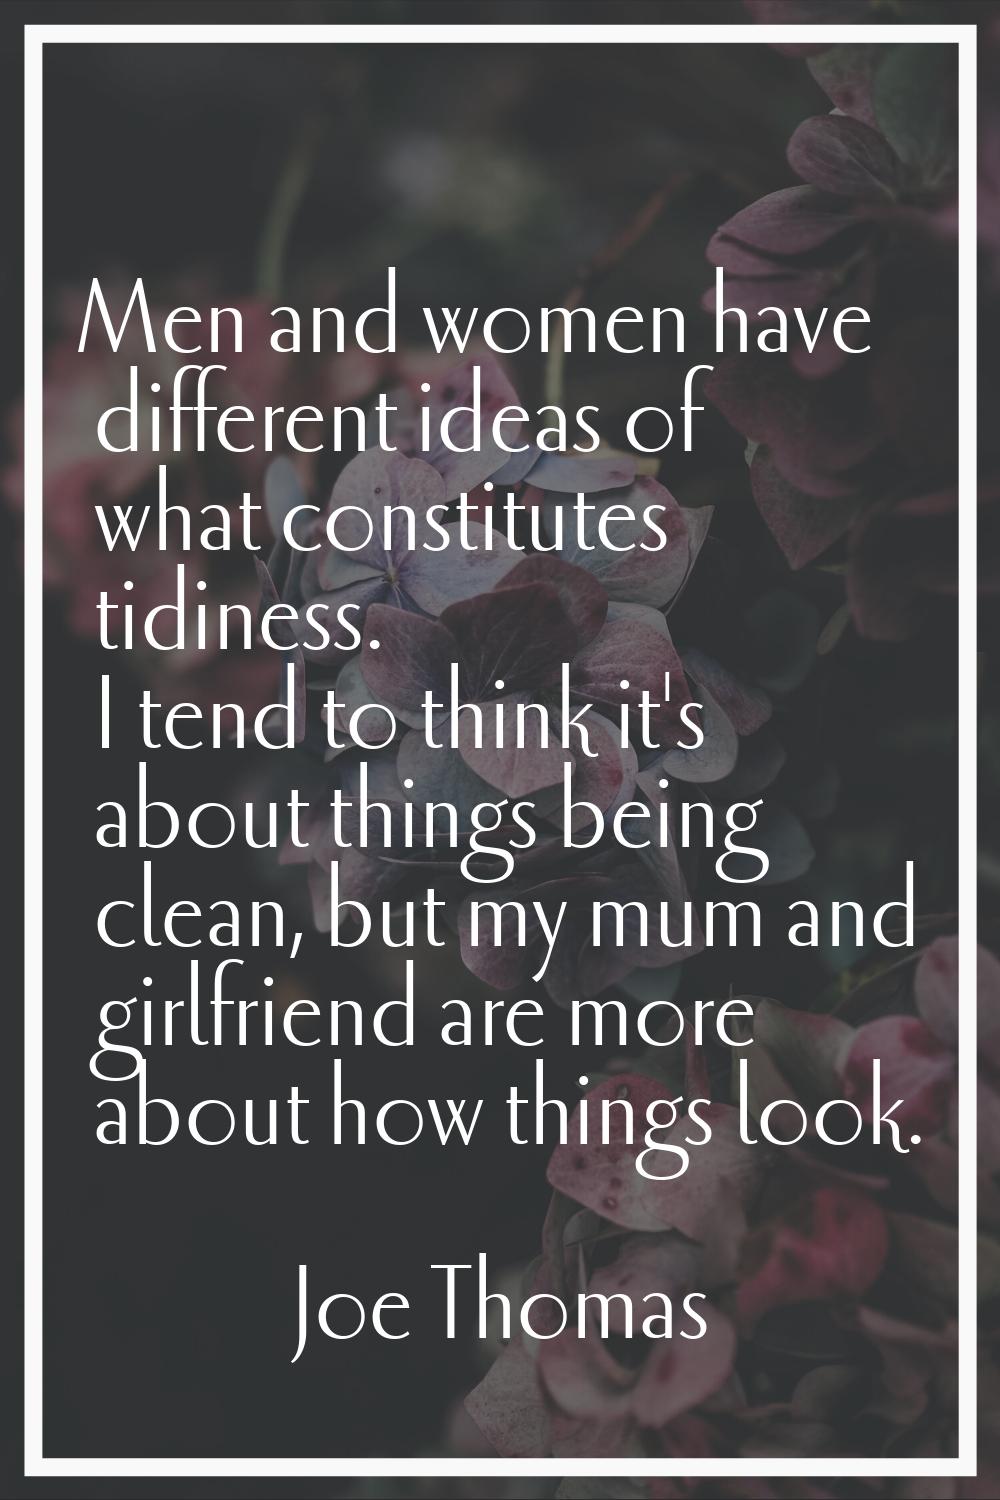 Men and women have different ideas of what constitutes tidiness. I tend to think it's about things 